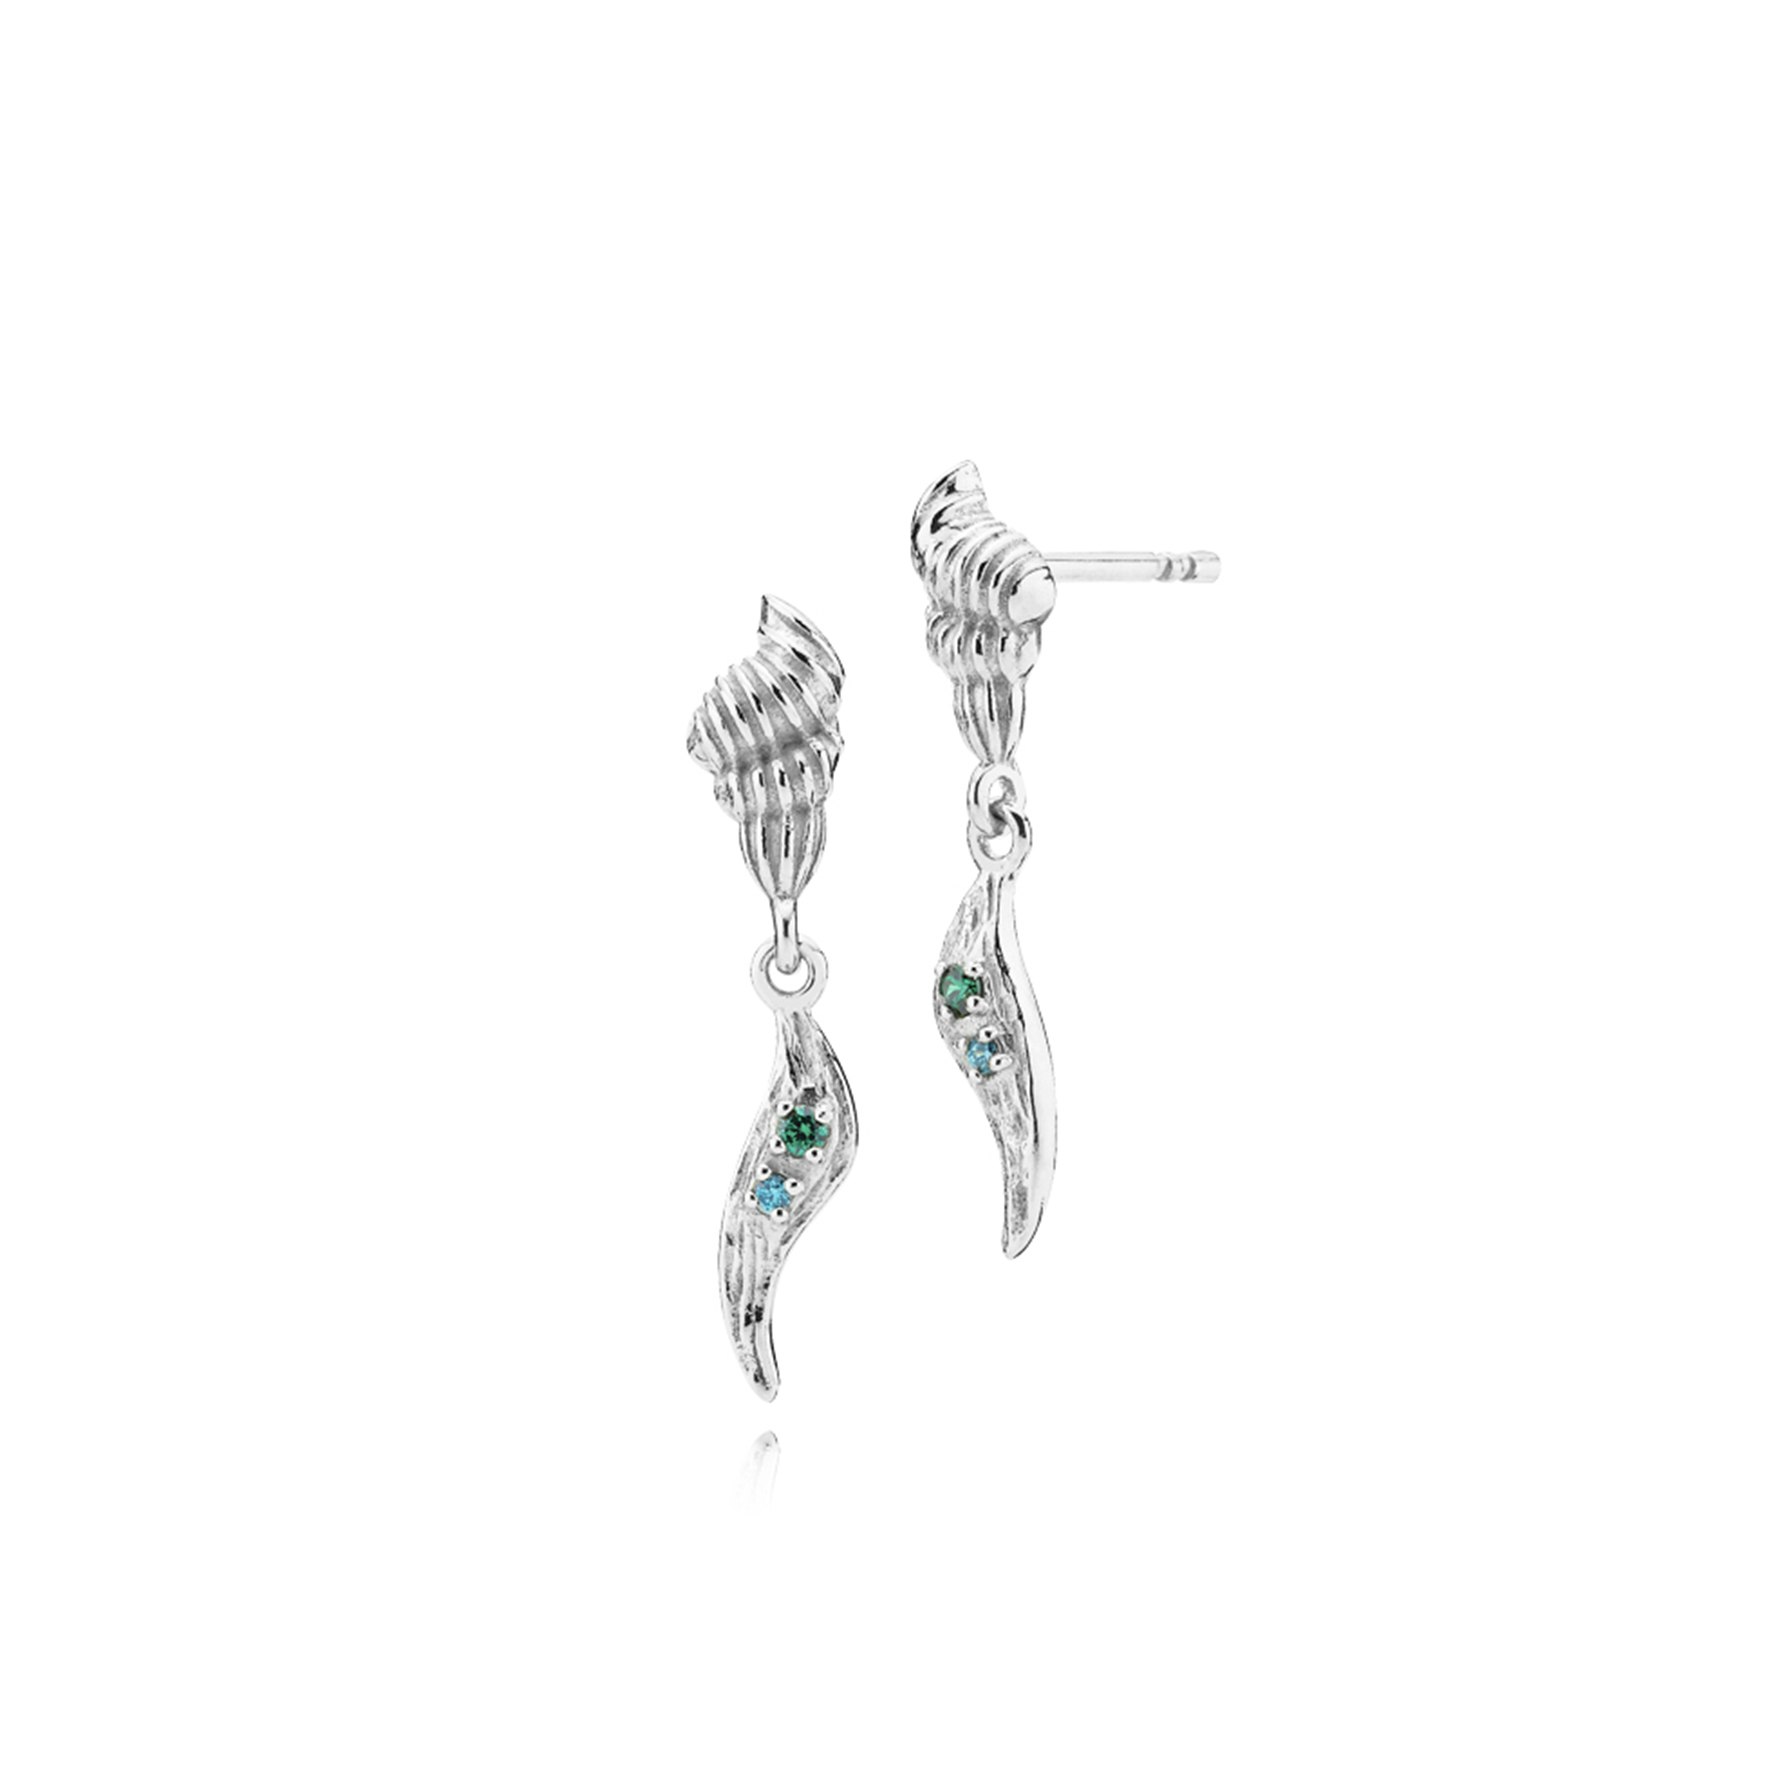 Kaia Earrings Green Onyx and Blue Topas from Sistie in Silver Sterling 925